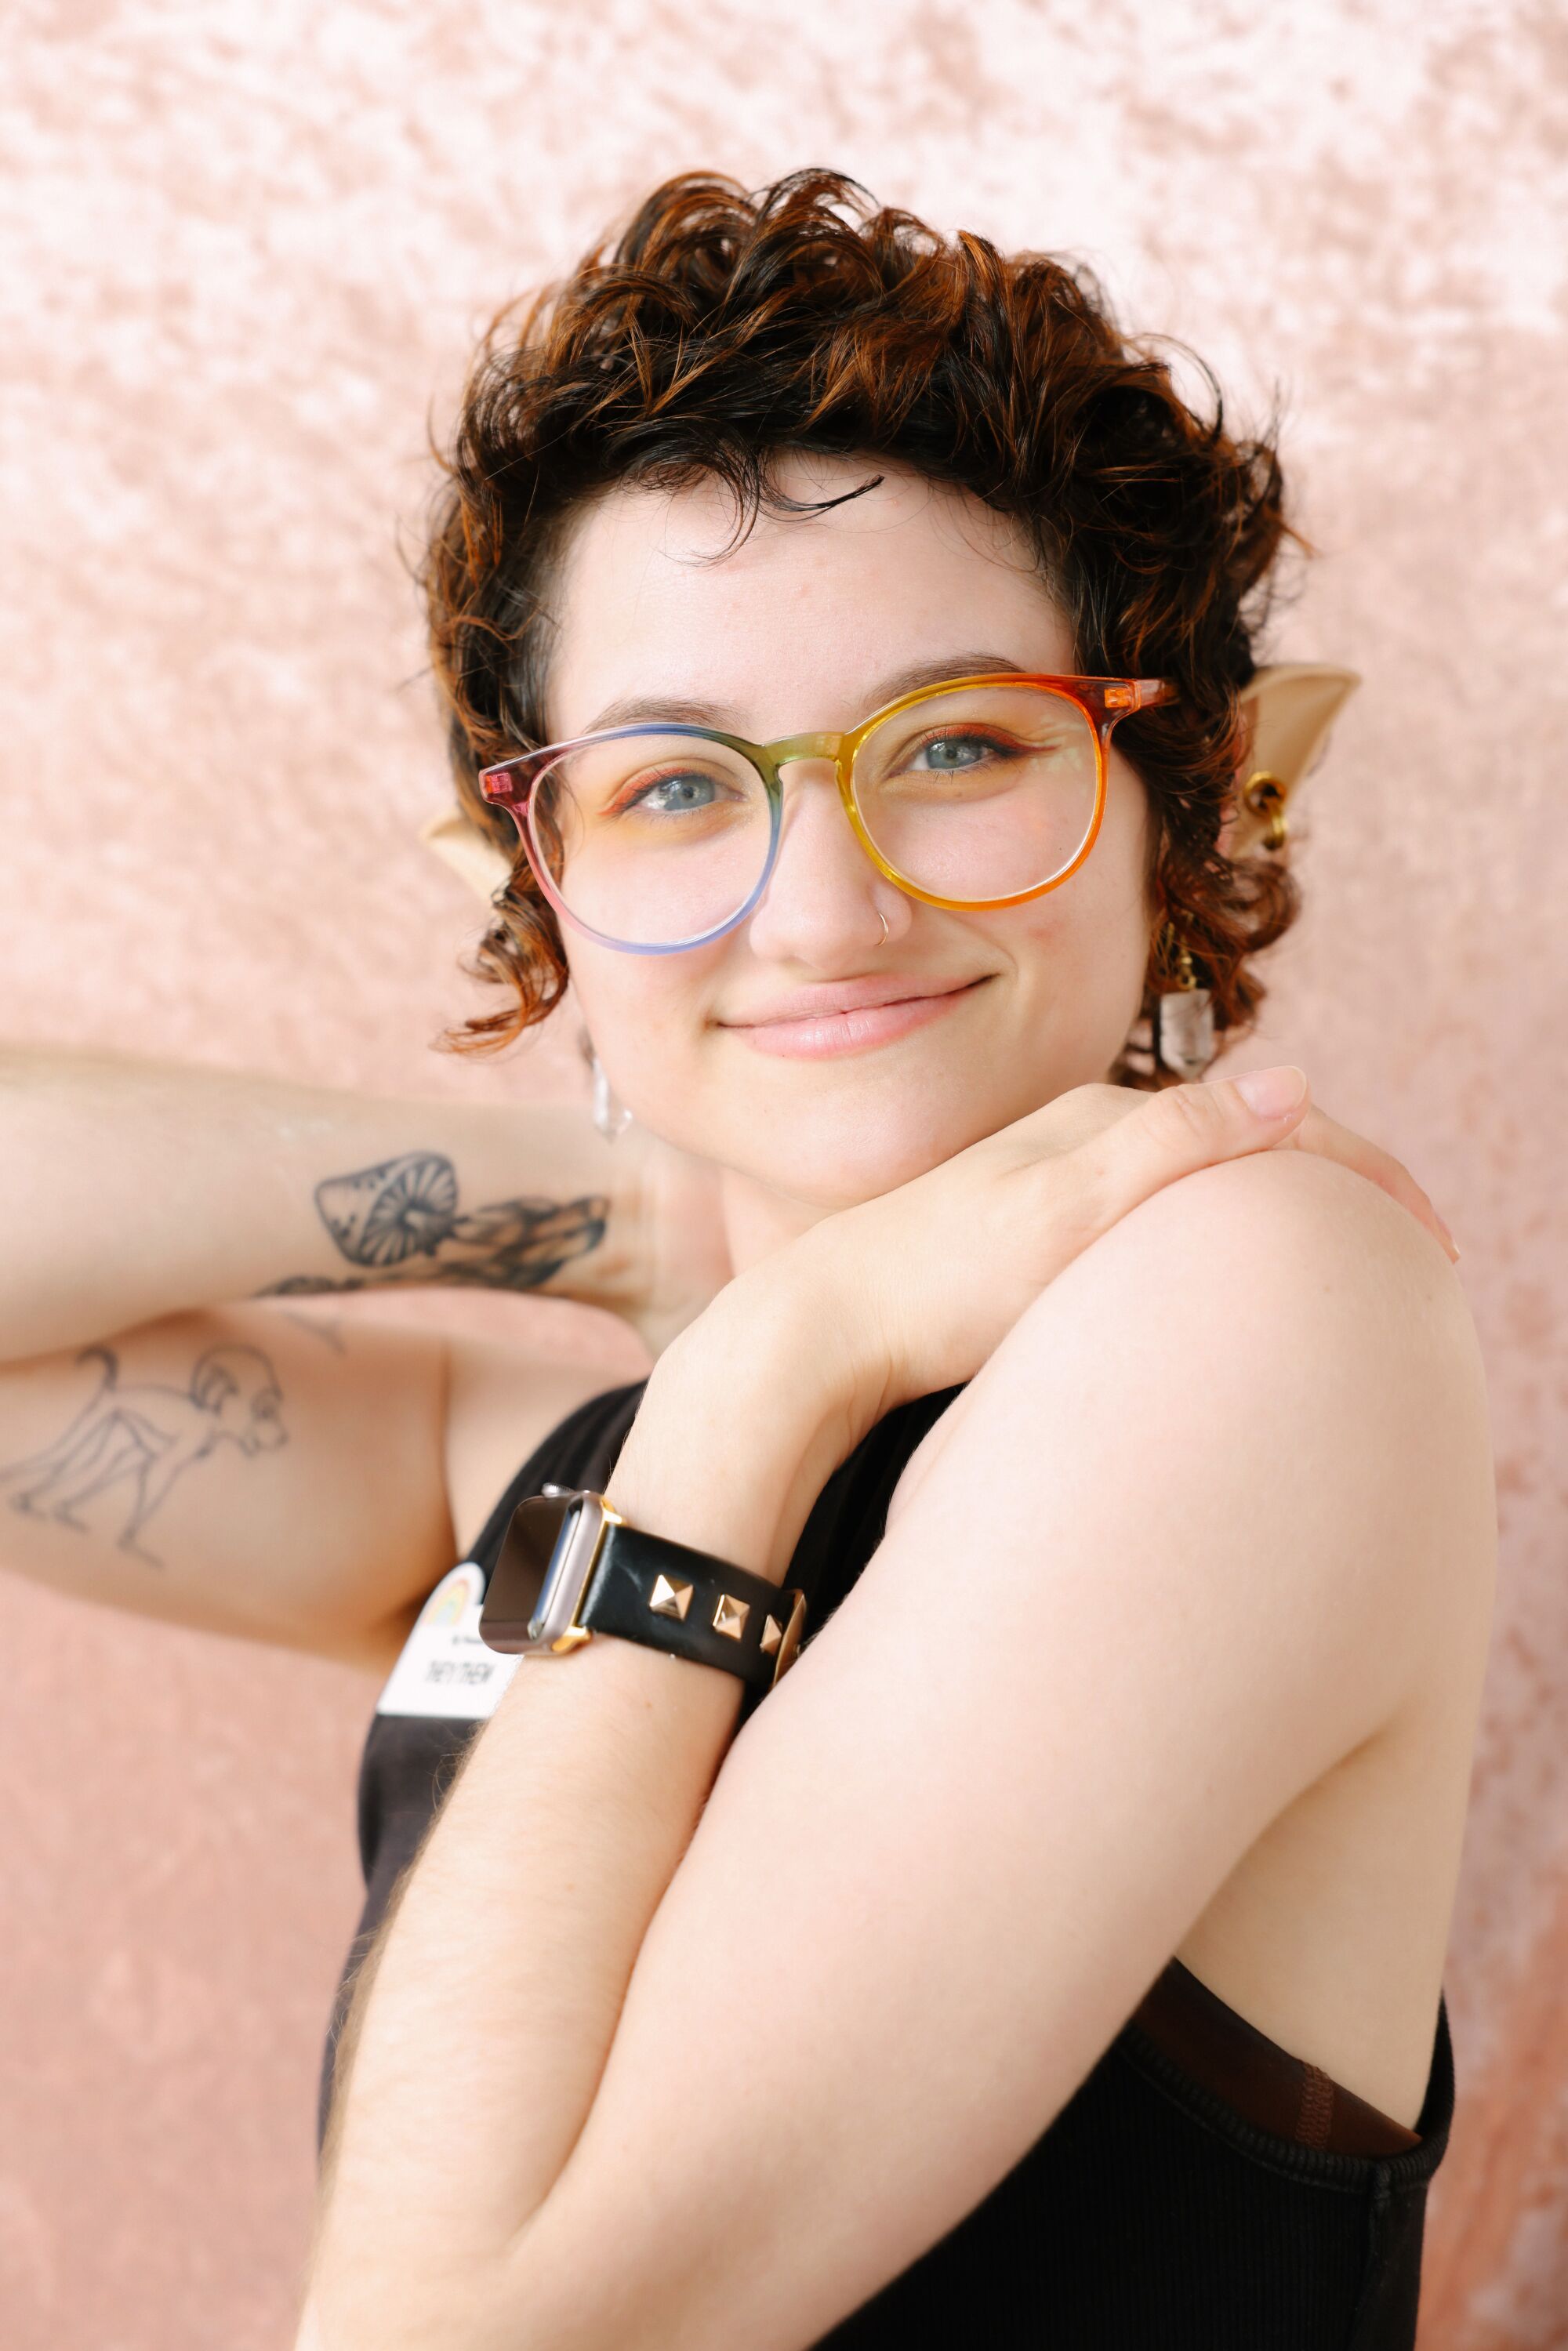 A person with rainbow glasses, elf ears and short hair poses for a portrait